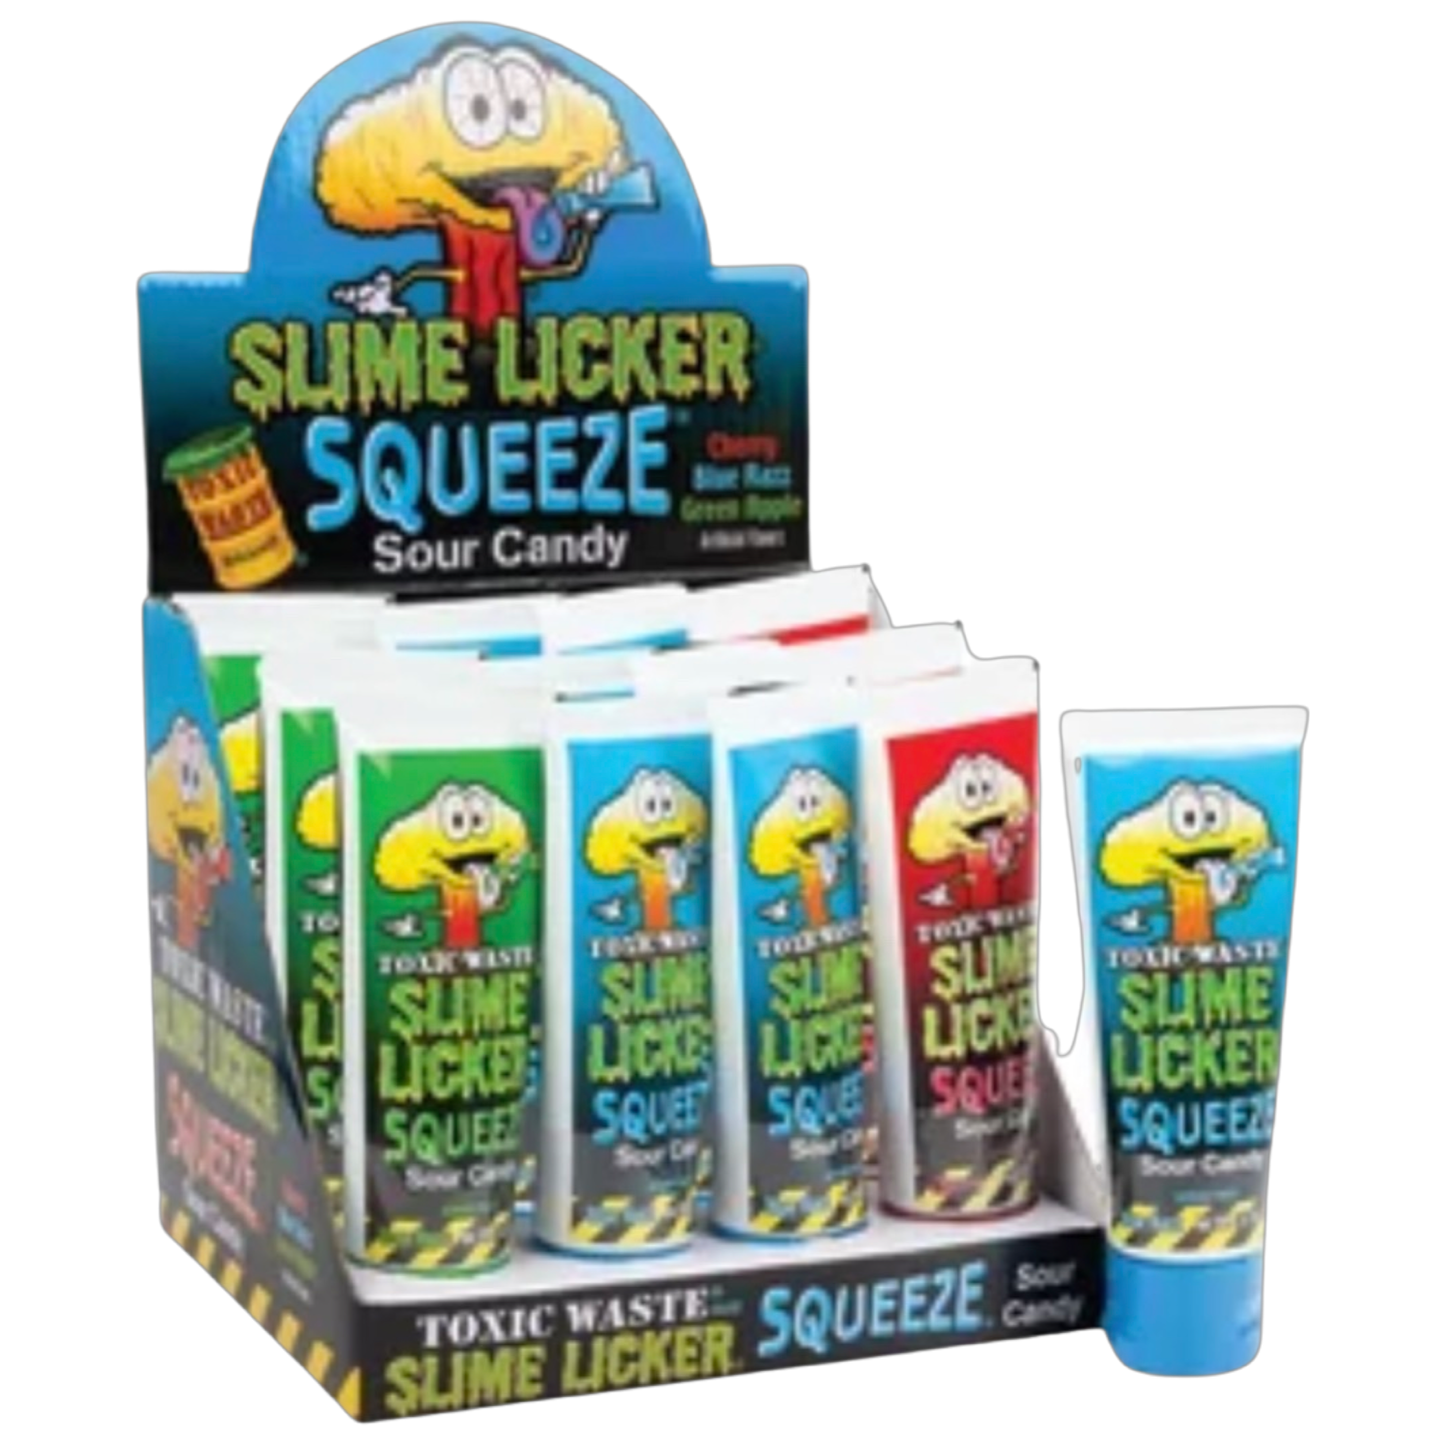 Toxic Waste Slime Licker SQUEEZE Candy